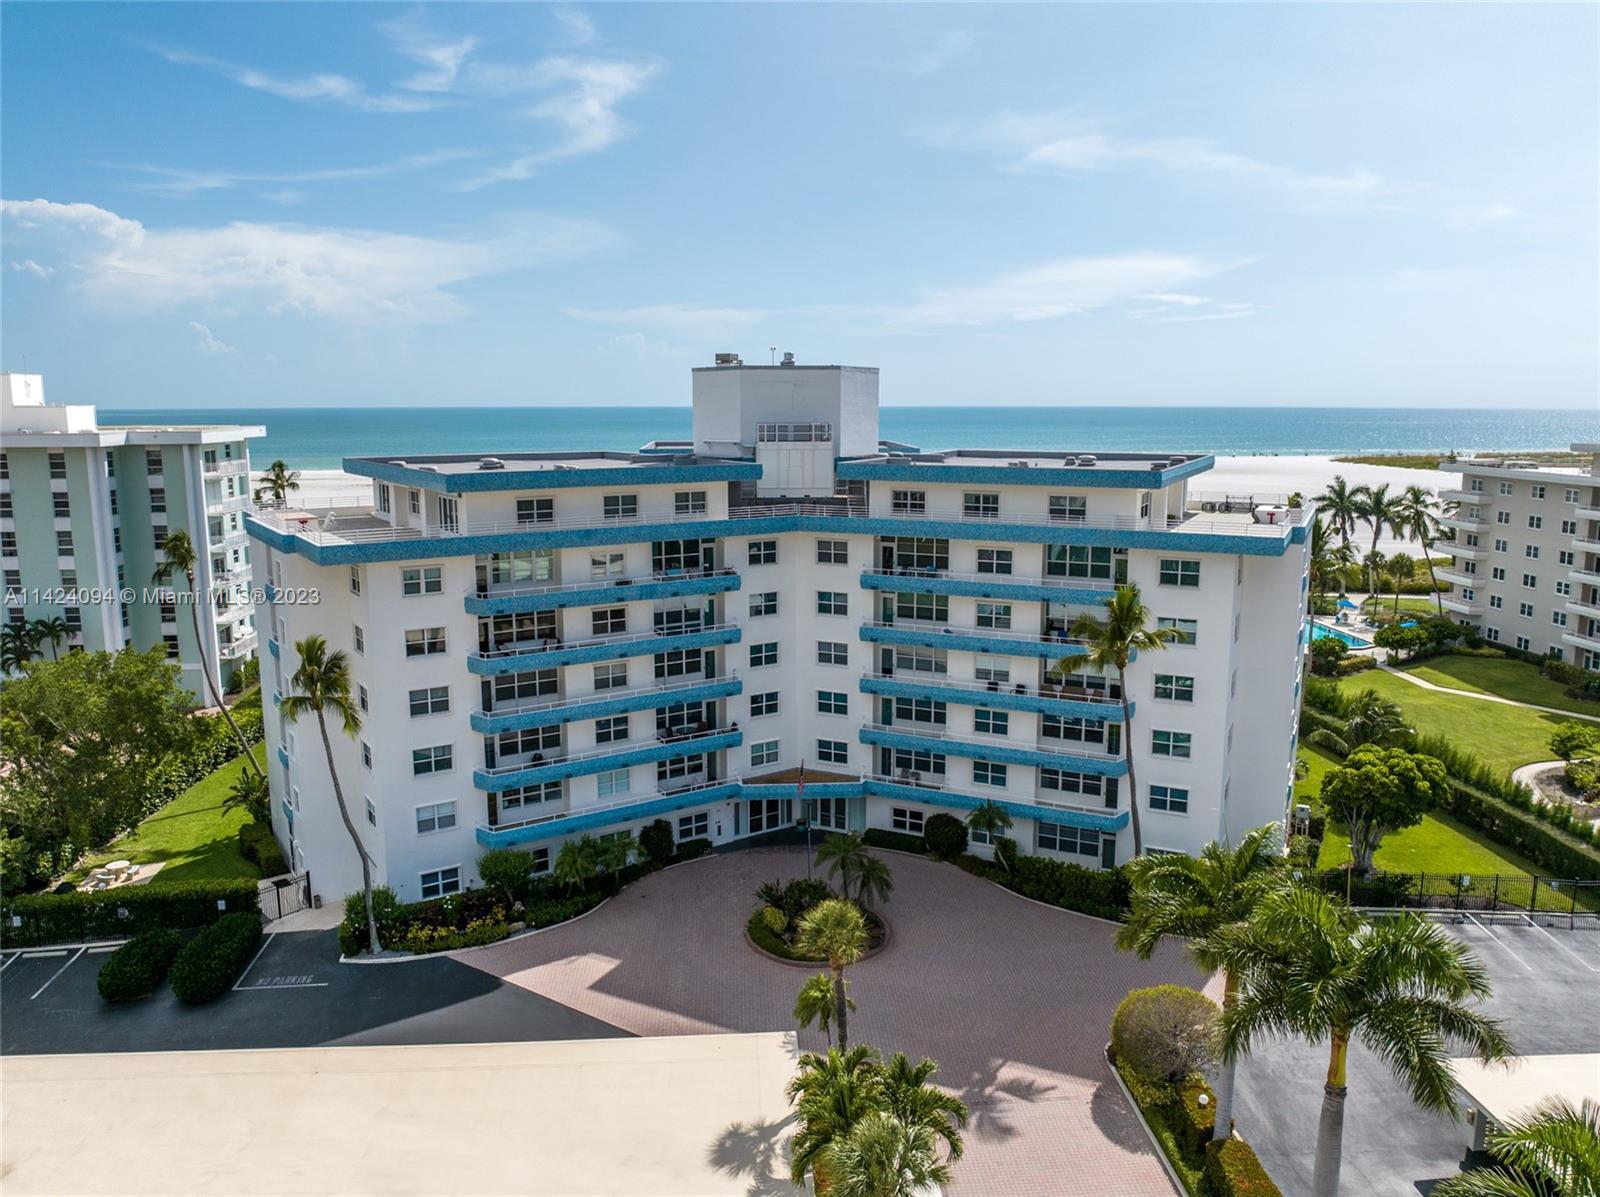 Photo of 220 Seaview Ct #313 in Marco Island, FL